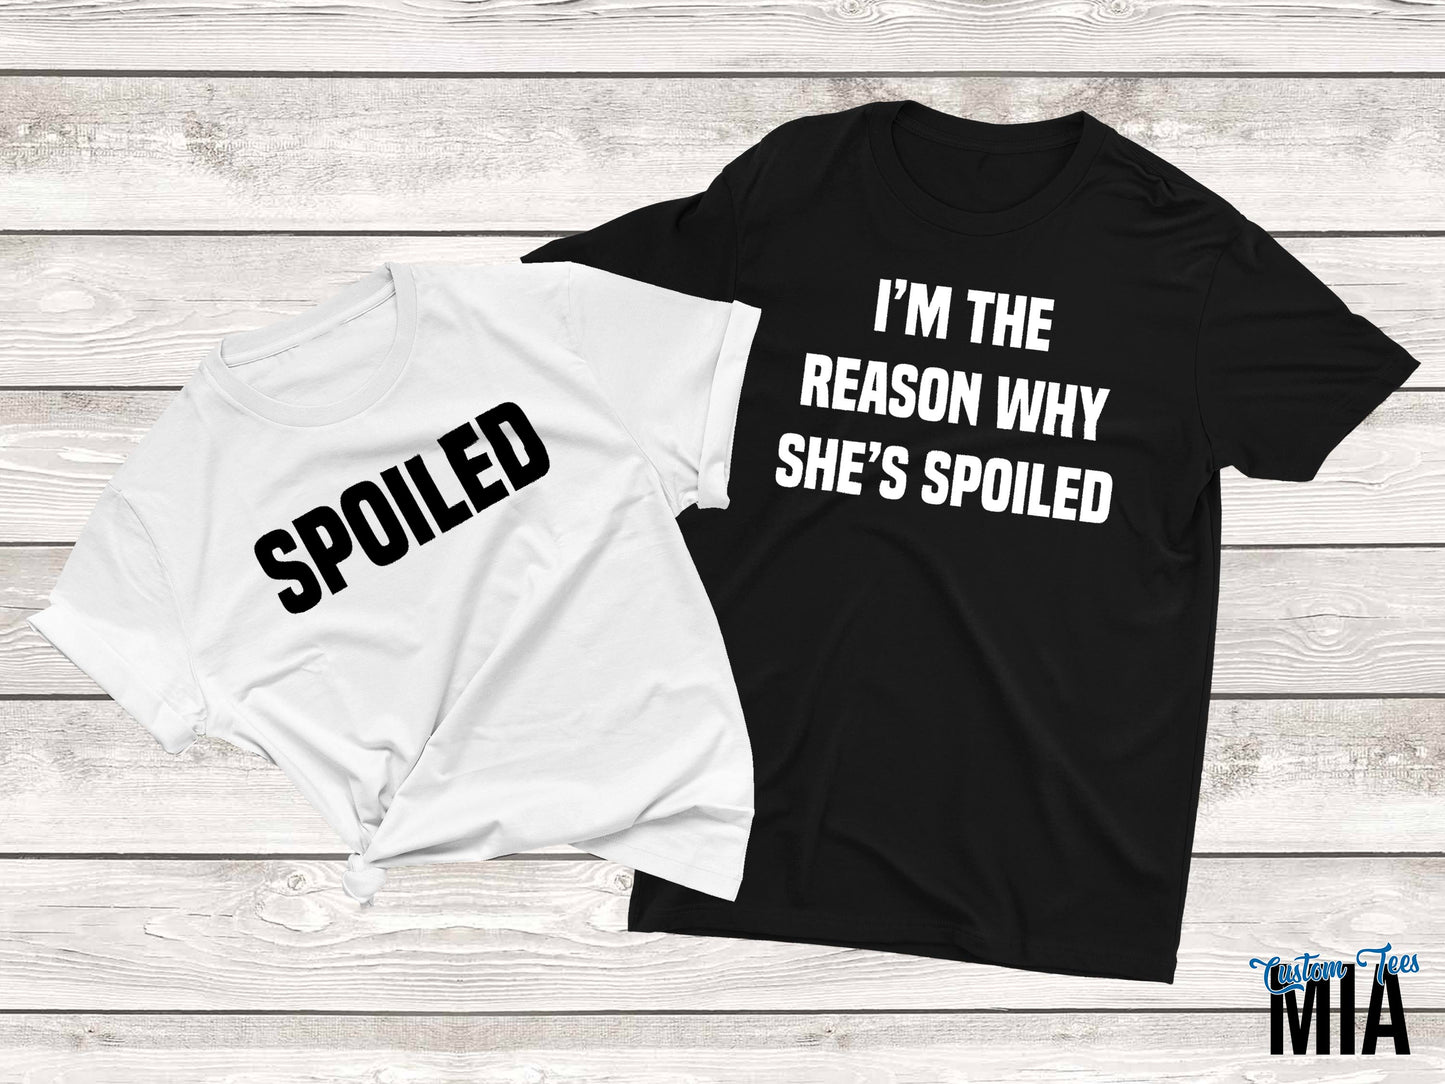 Spoiled & I'm The Reason Why She's Spoiled Shirt